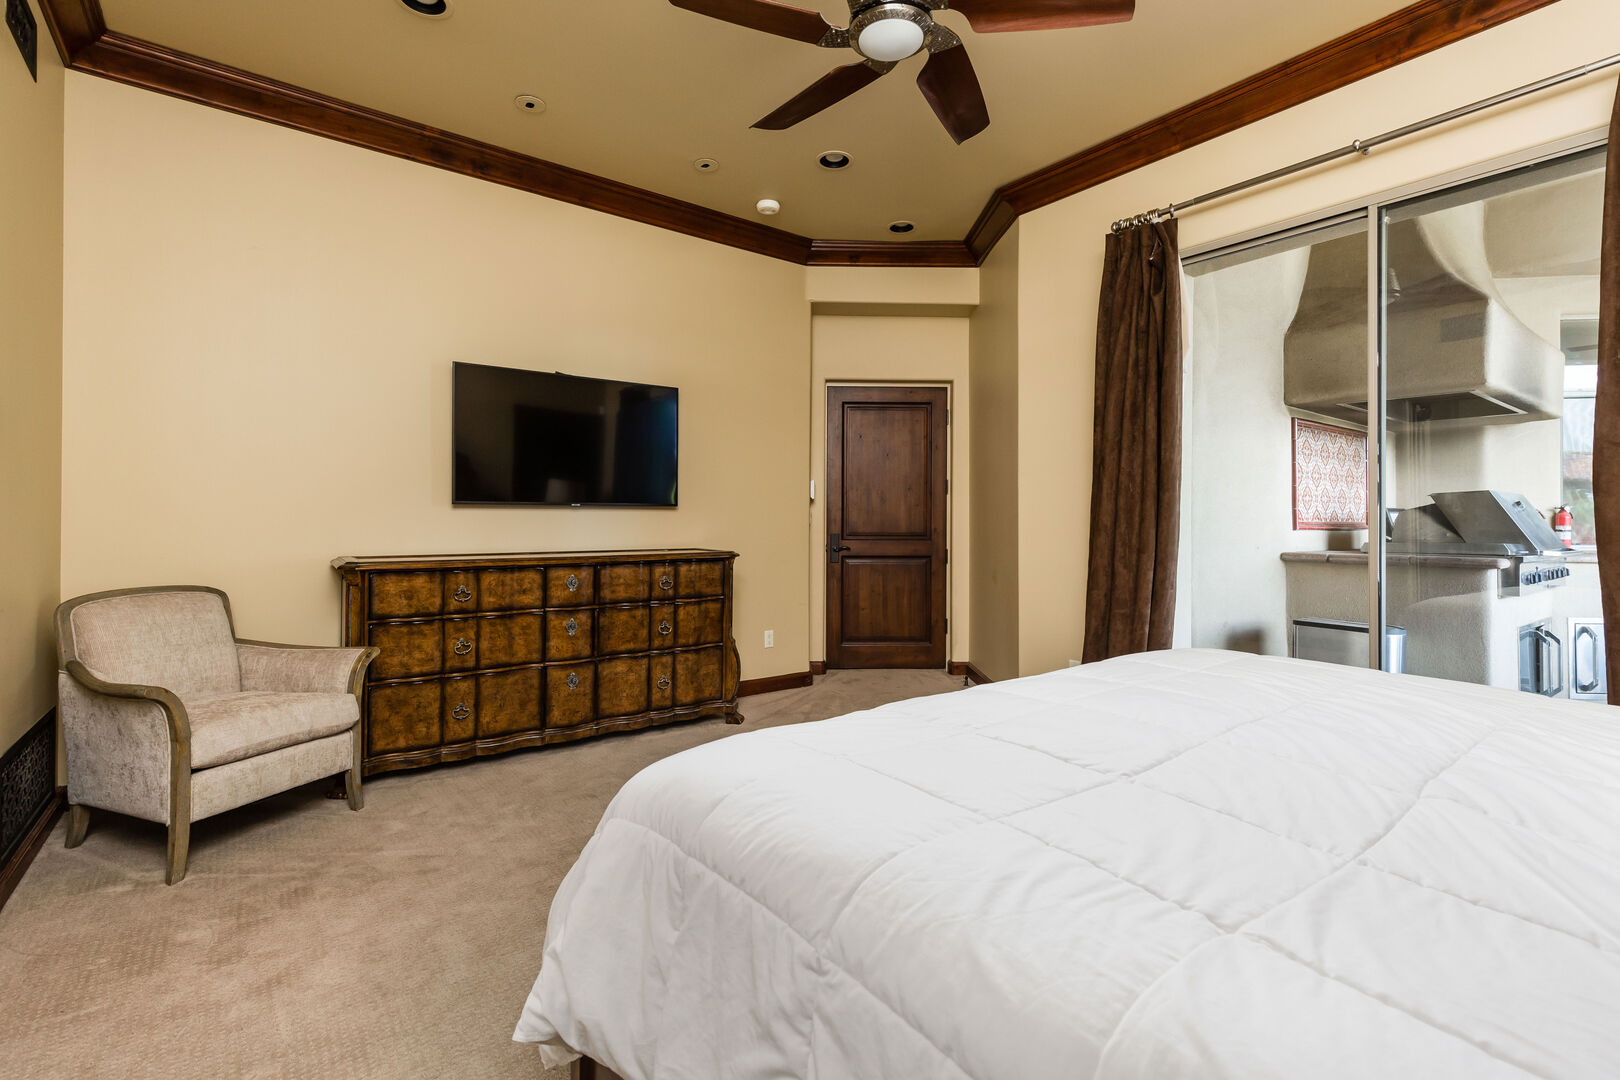 3rd Bedroom featuring a King Bed, bedroom furnishings, and a Smart TV with an ensuite Bathroom.